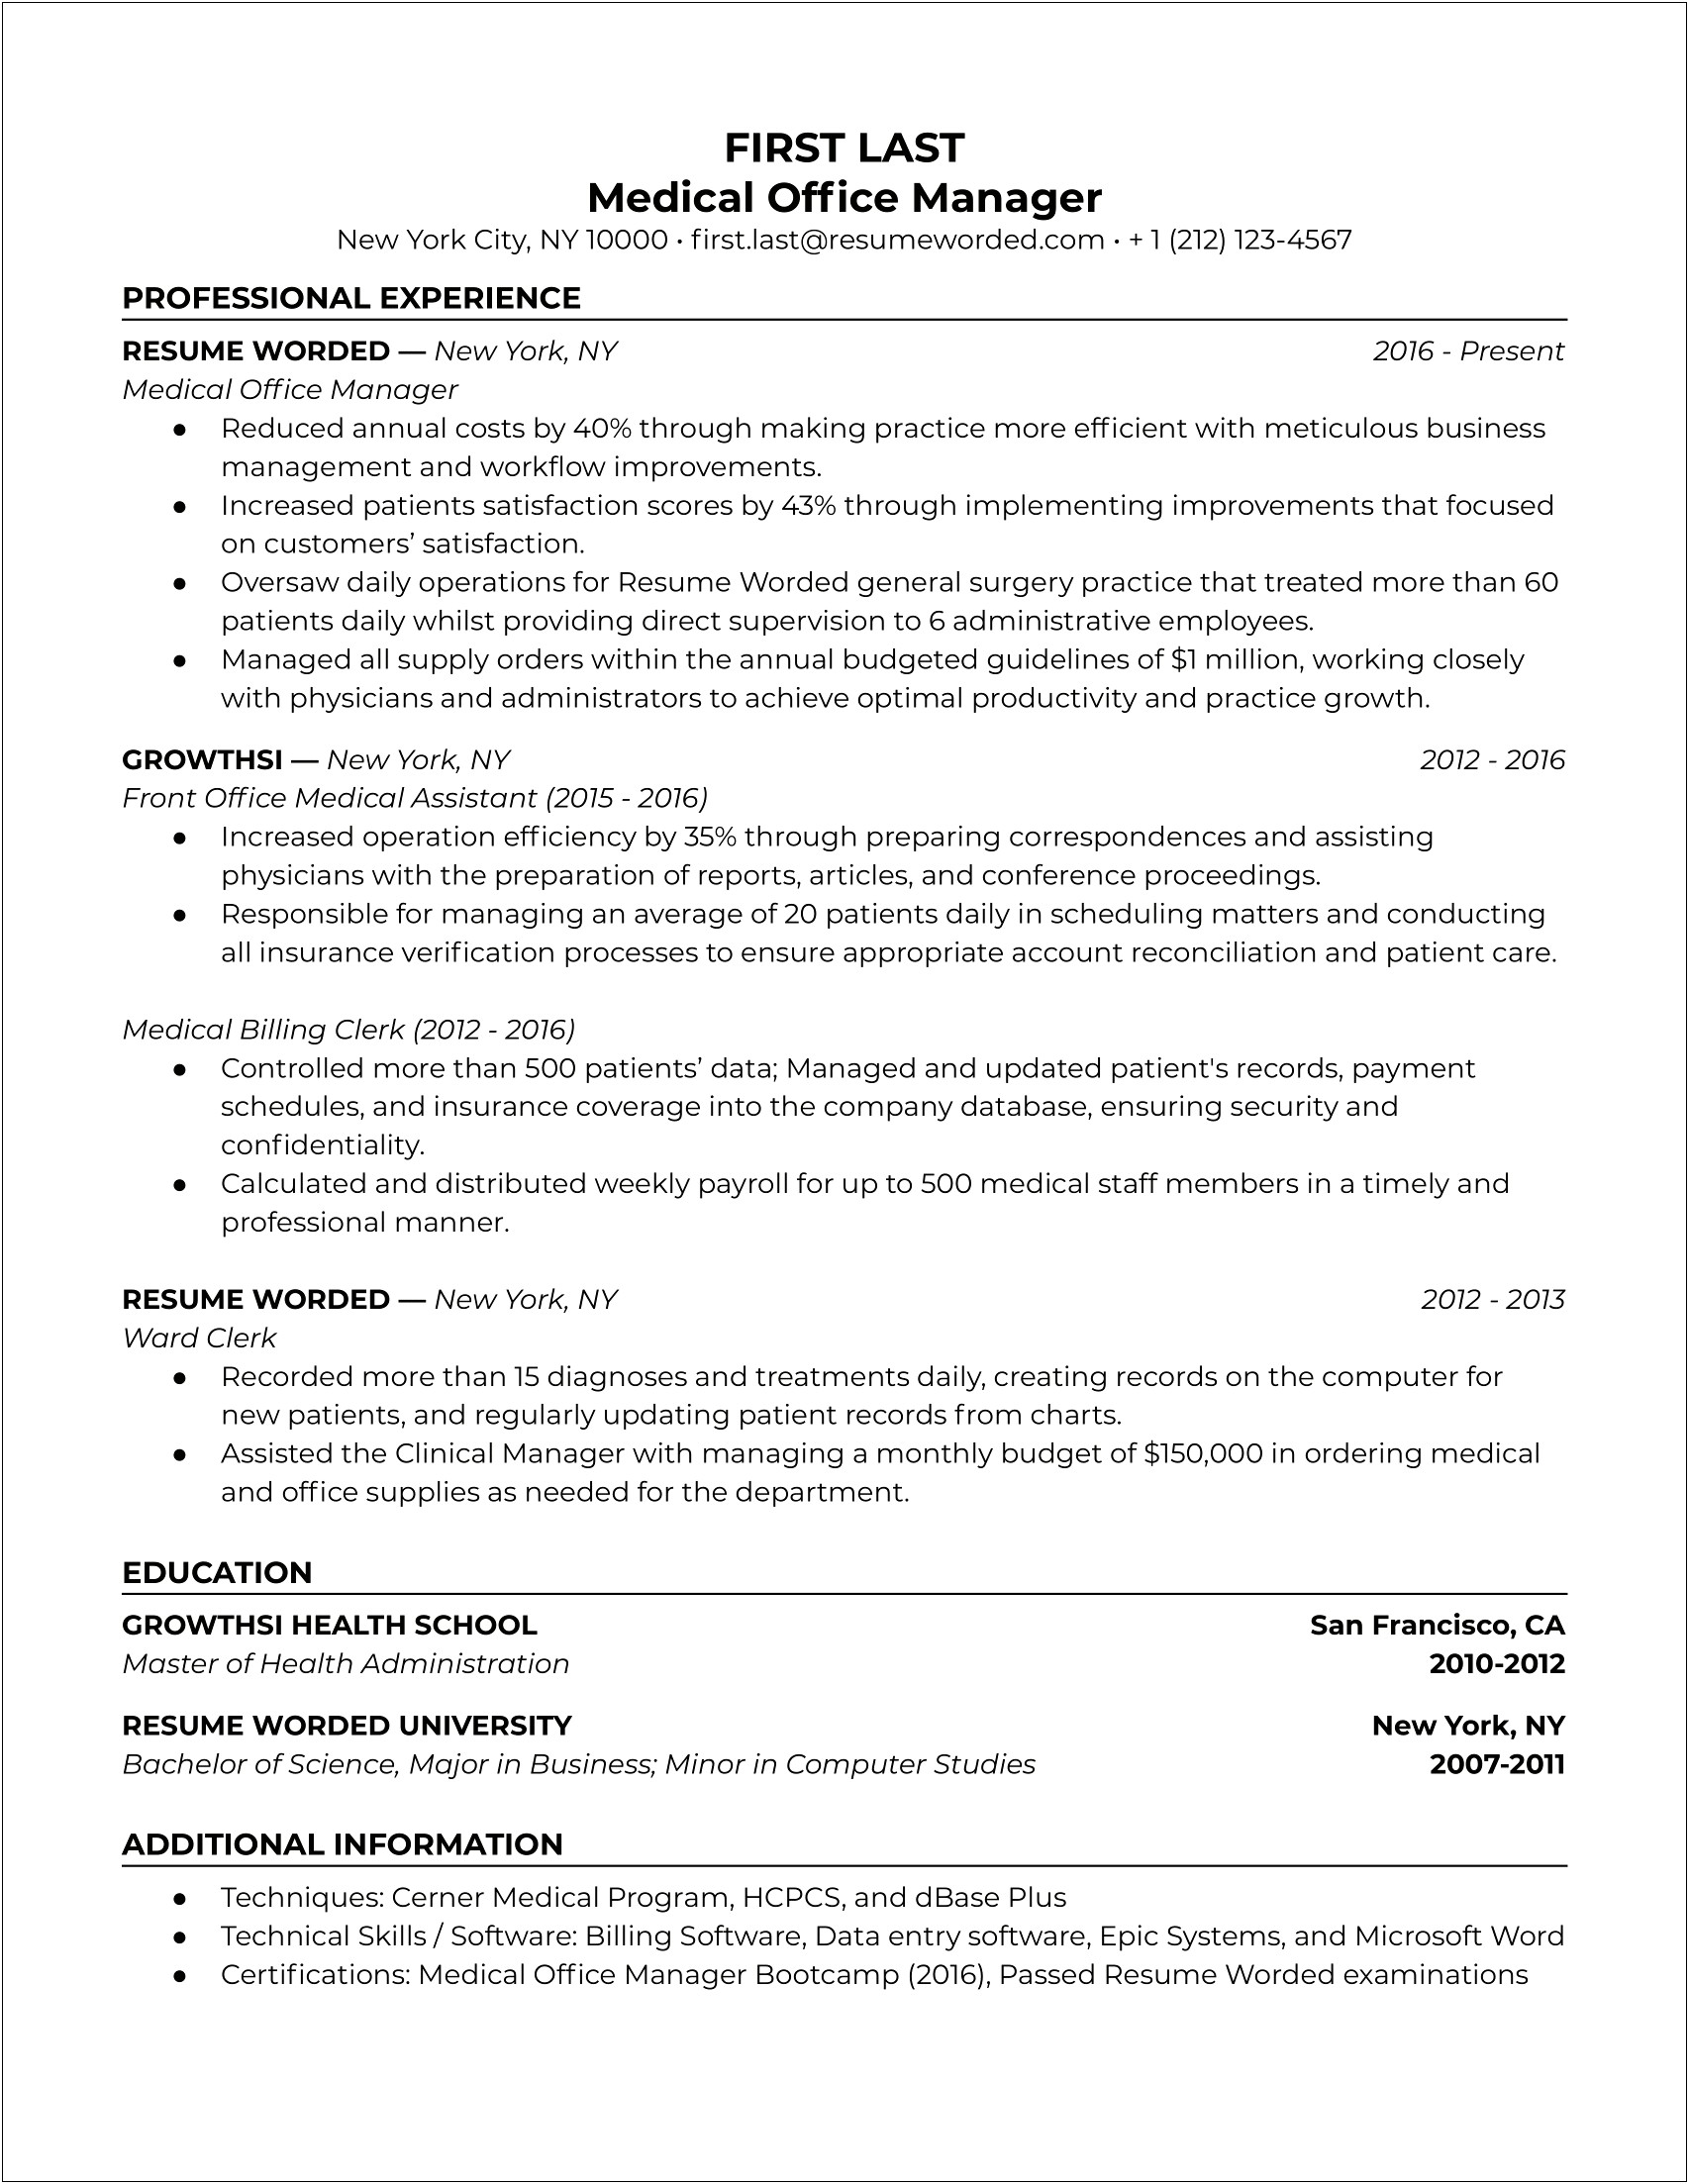 Convention Center Director Resume Objective